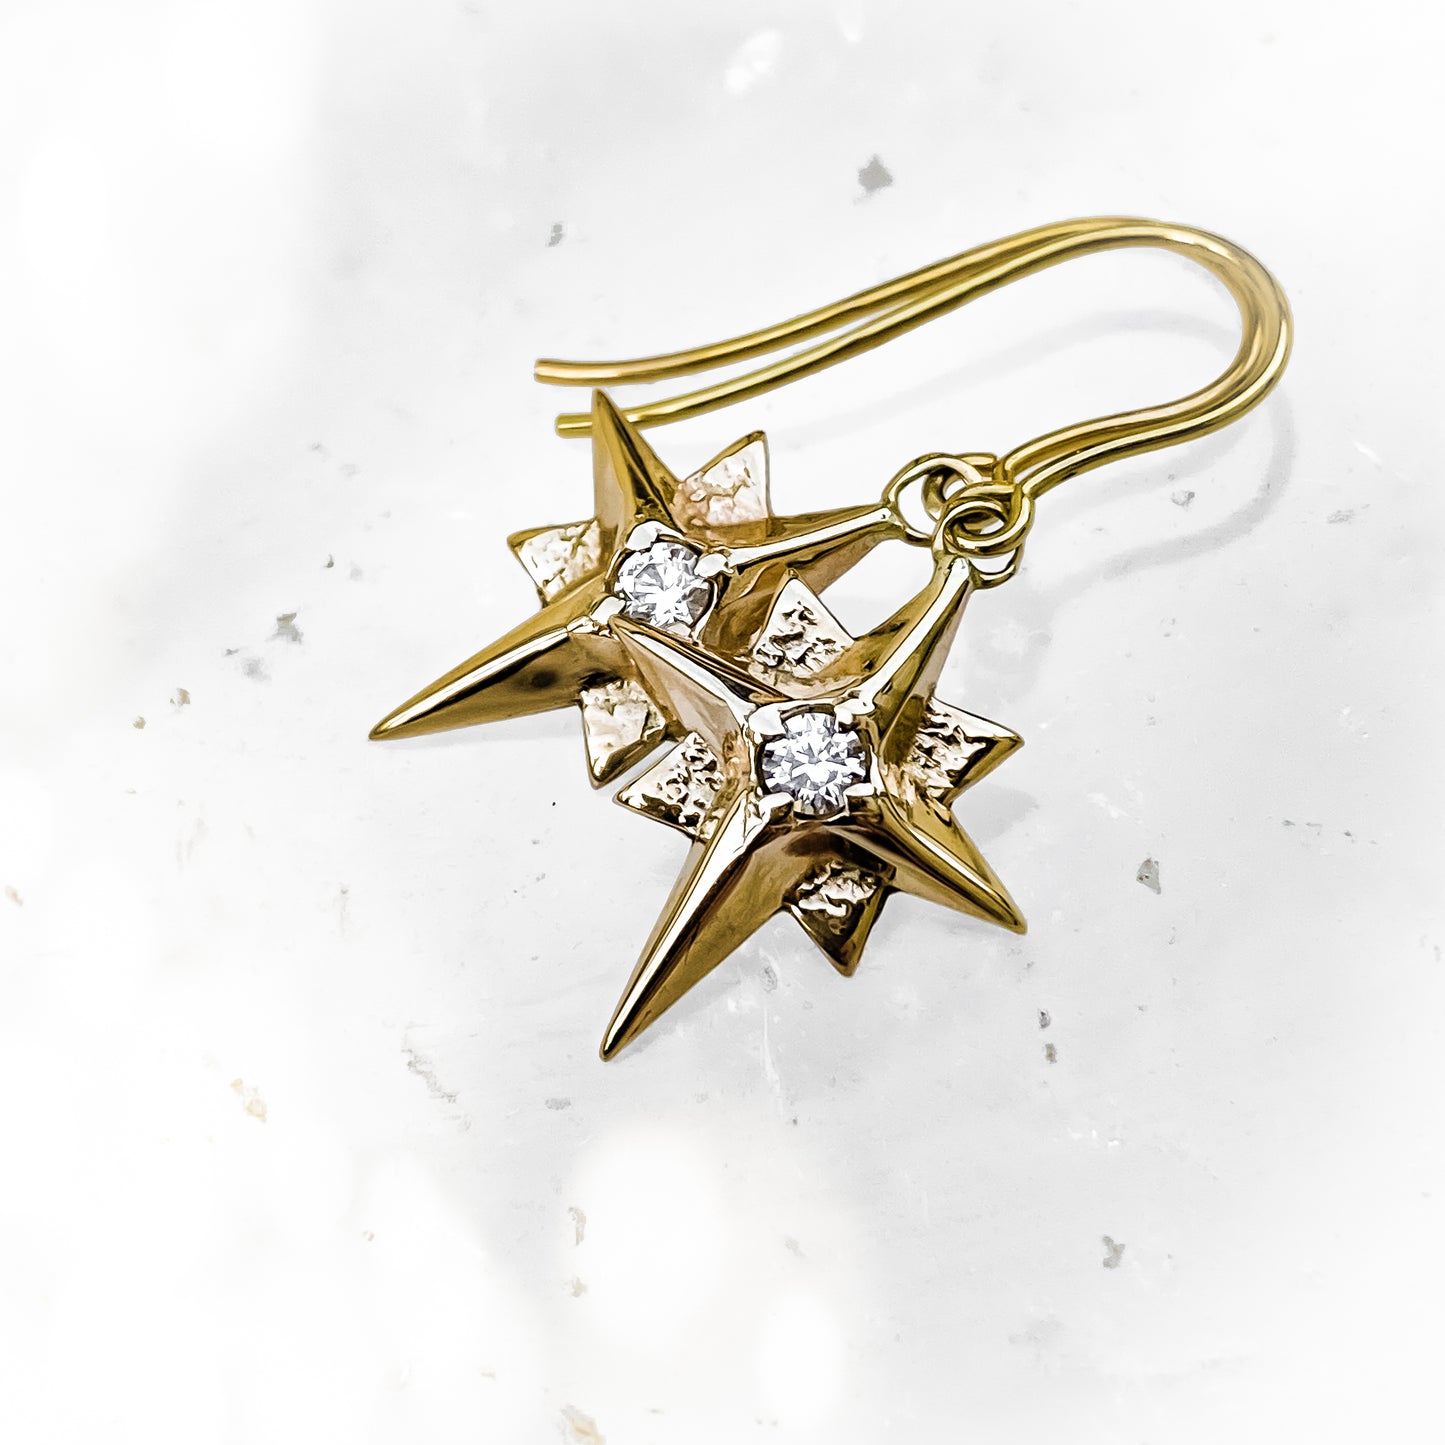 North Star Earrings with Moissanite - 9ct Yellow Gold